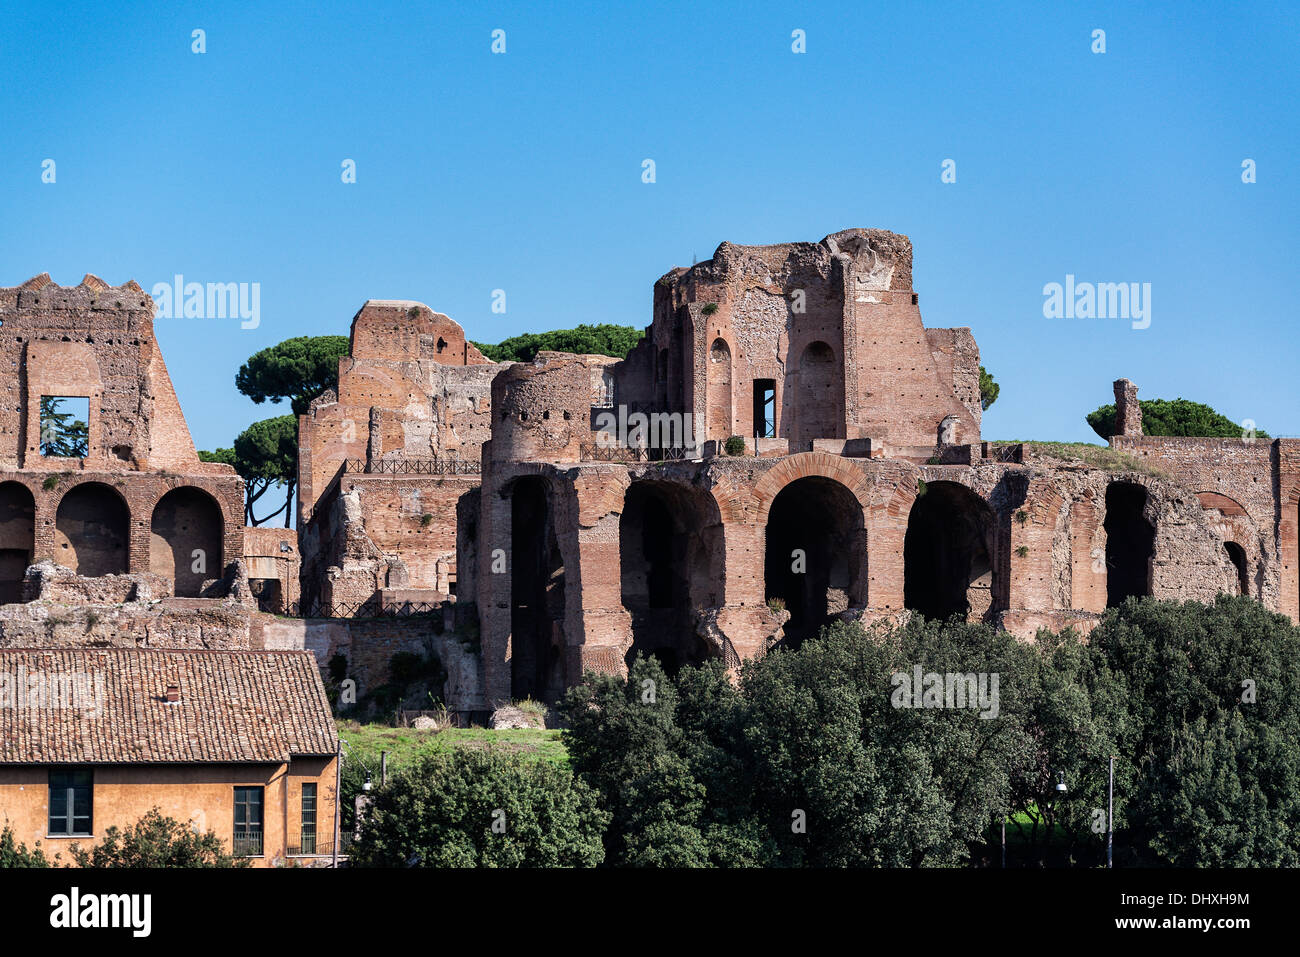 Ancient architectural ruins of Palatine Hill which was the origin of Rome, Italy Stock Photo